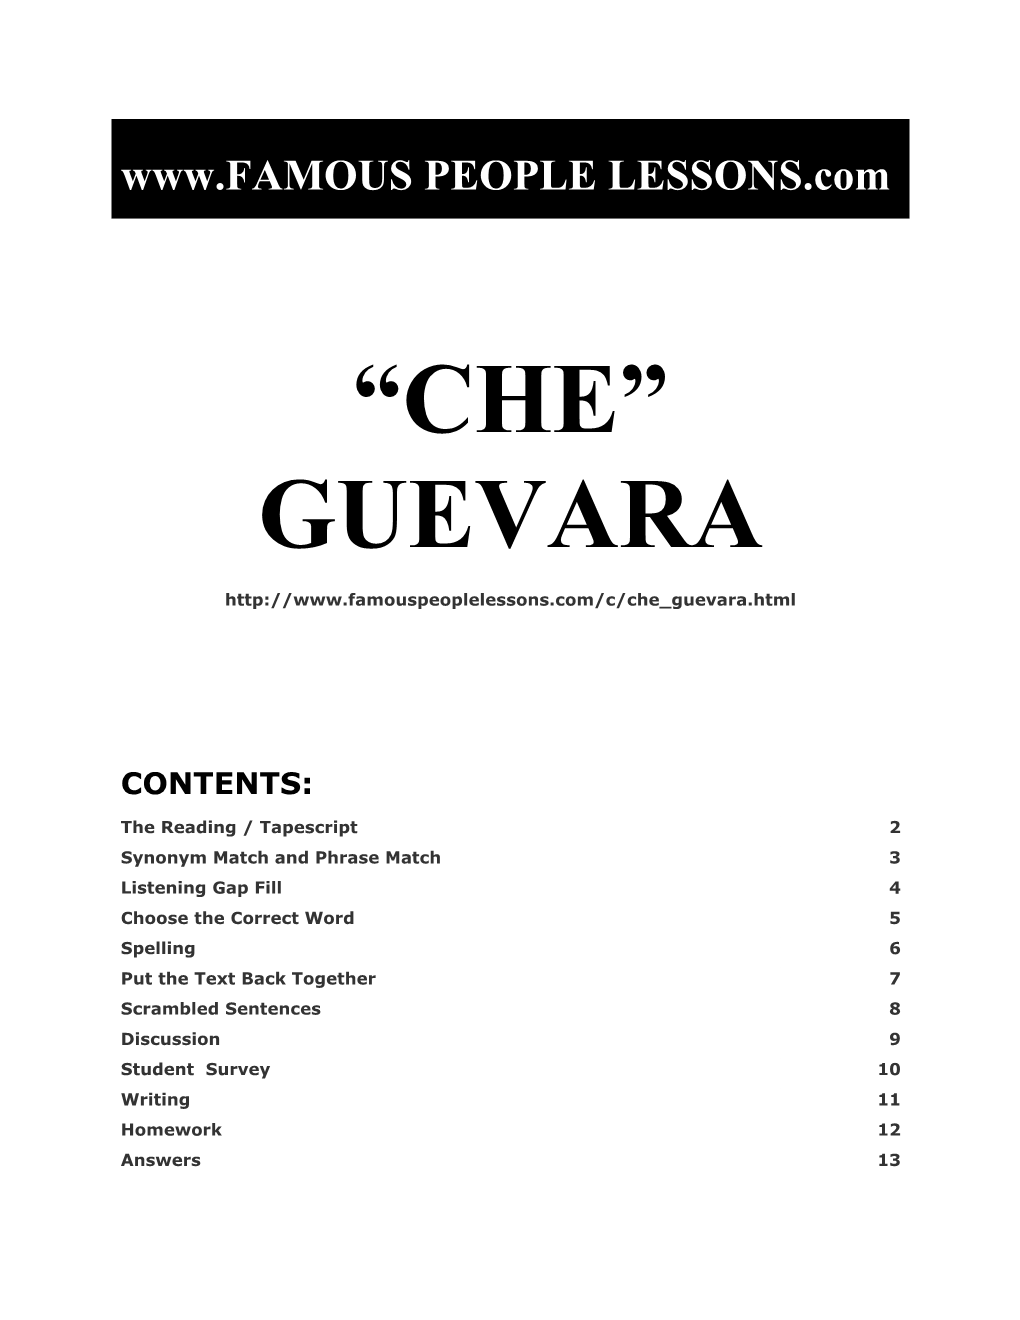 Famous People Lessons - Ernesto Che Guevara s1